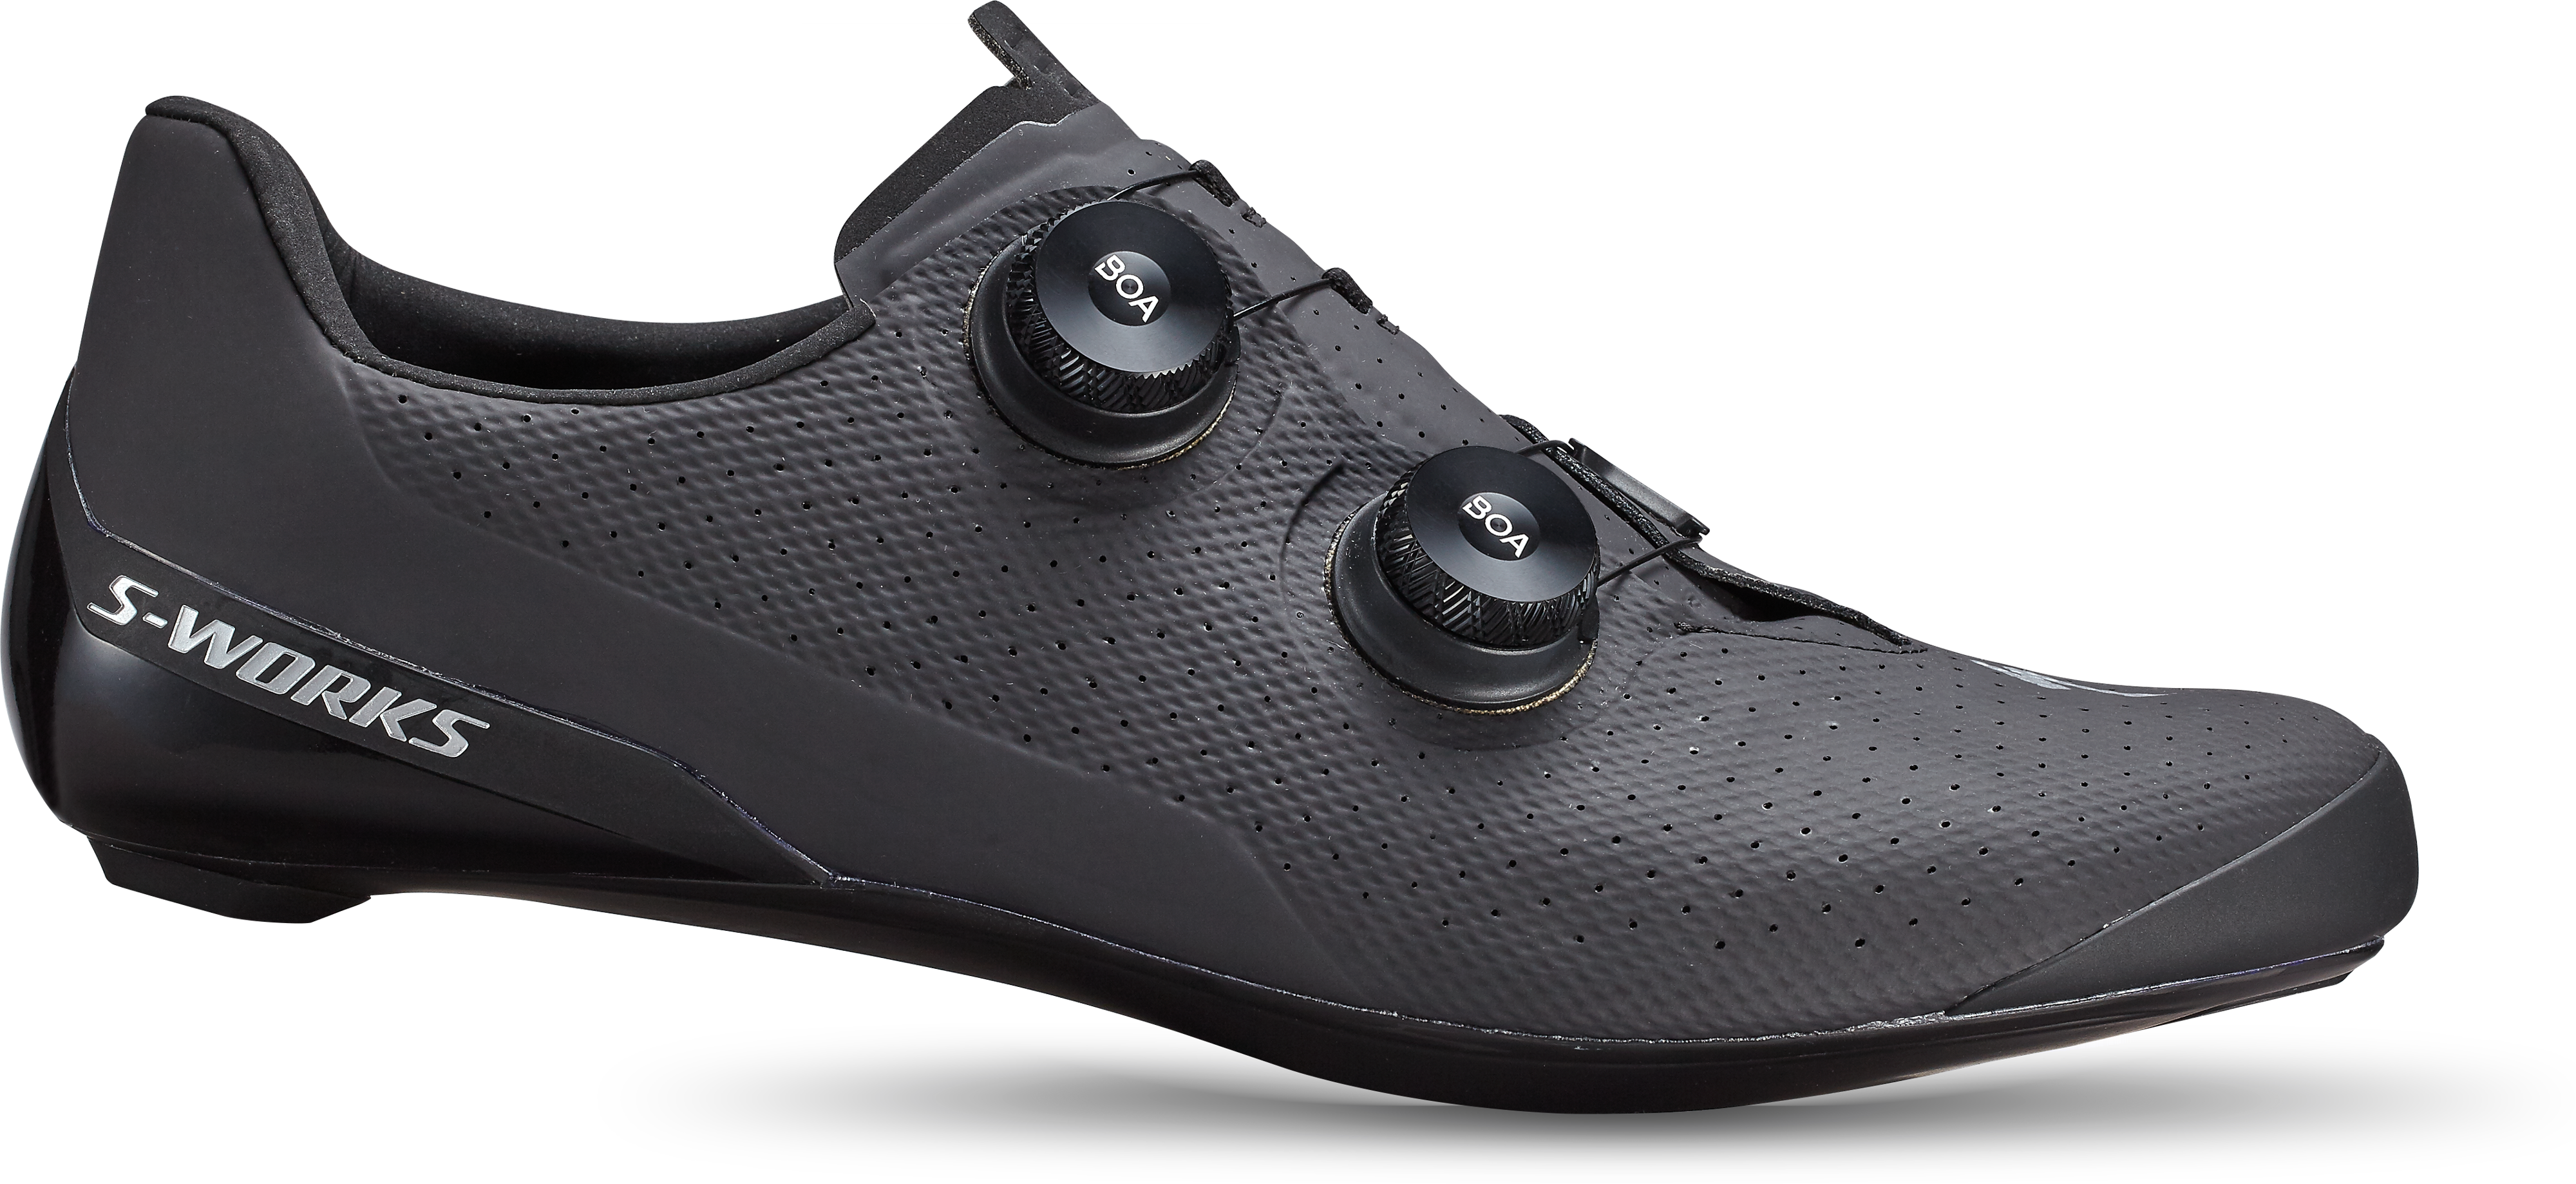 S-WORKS TORCH ROAD SHOES BLK 41(41 (26cm) ブラック): シューズ 